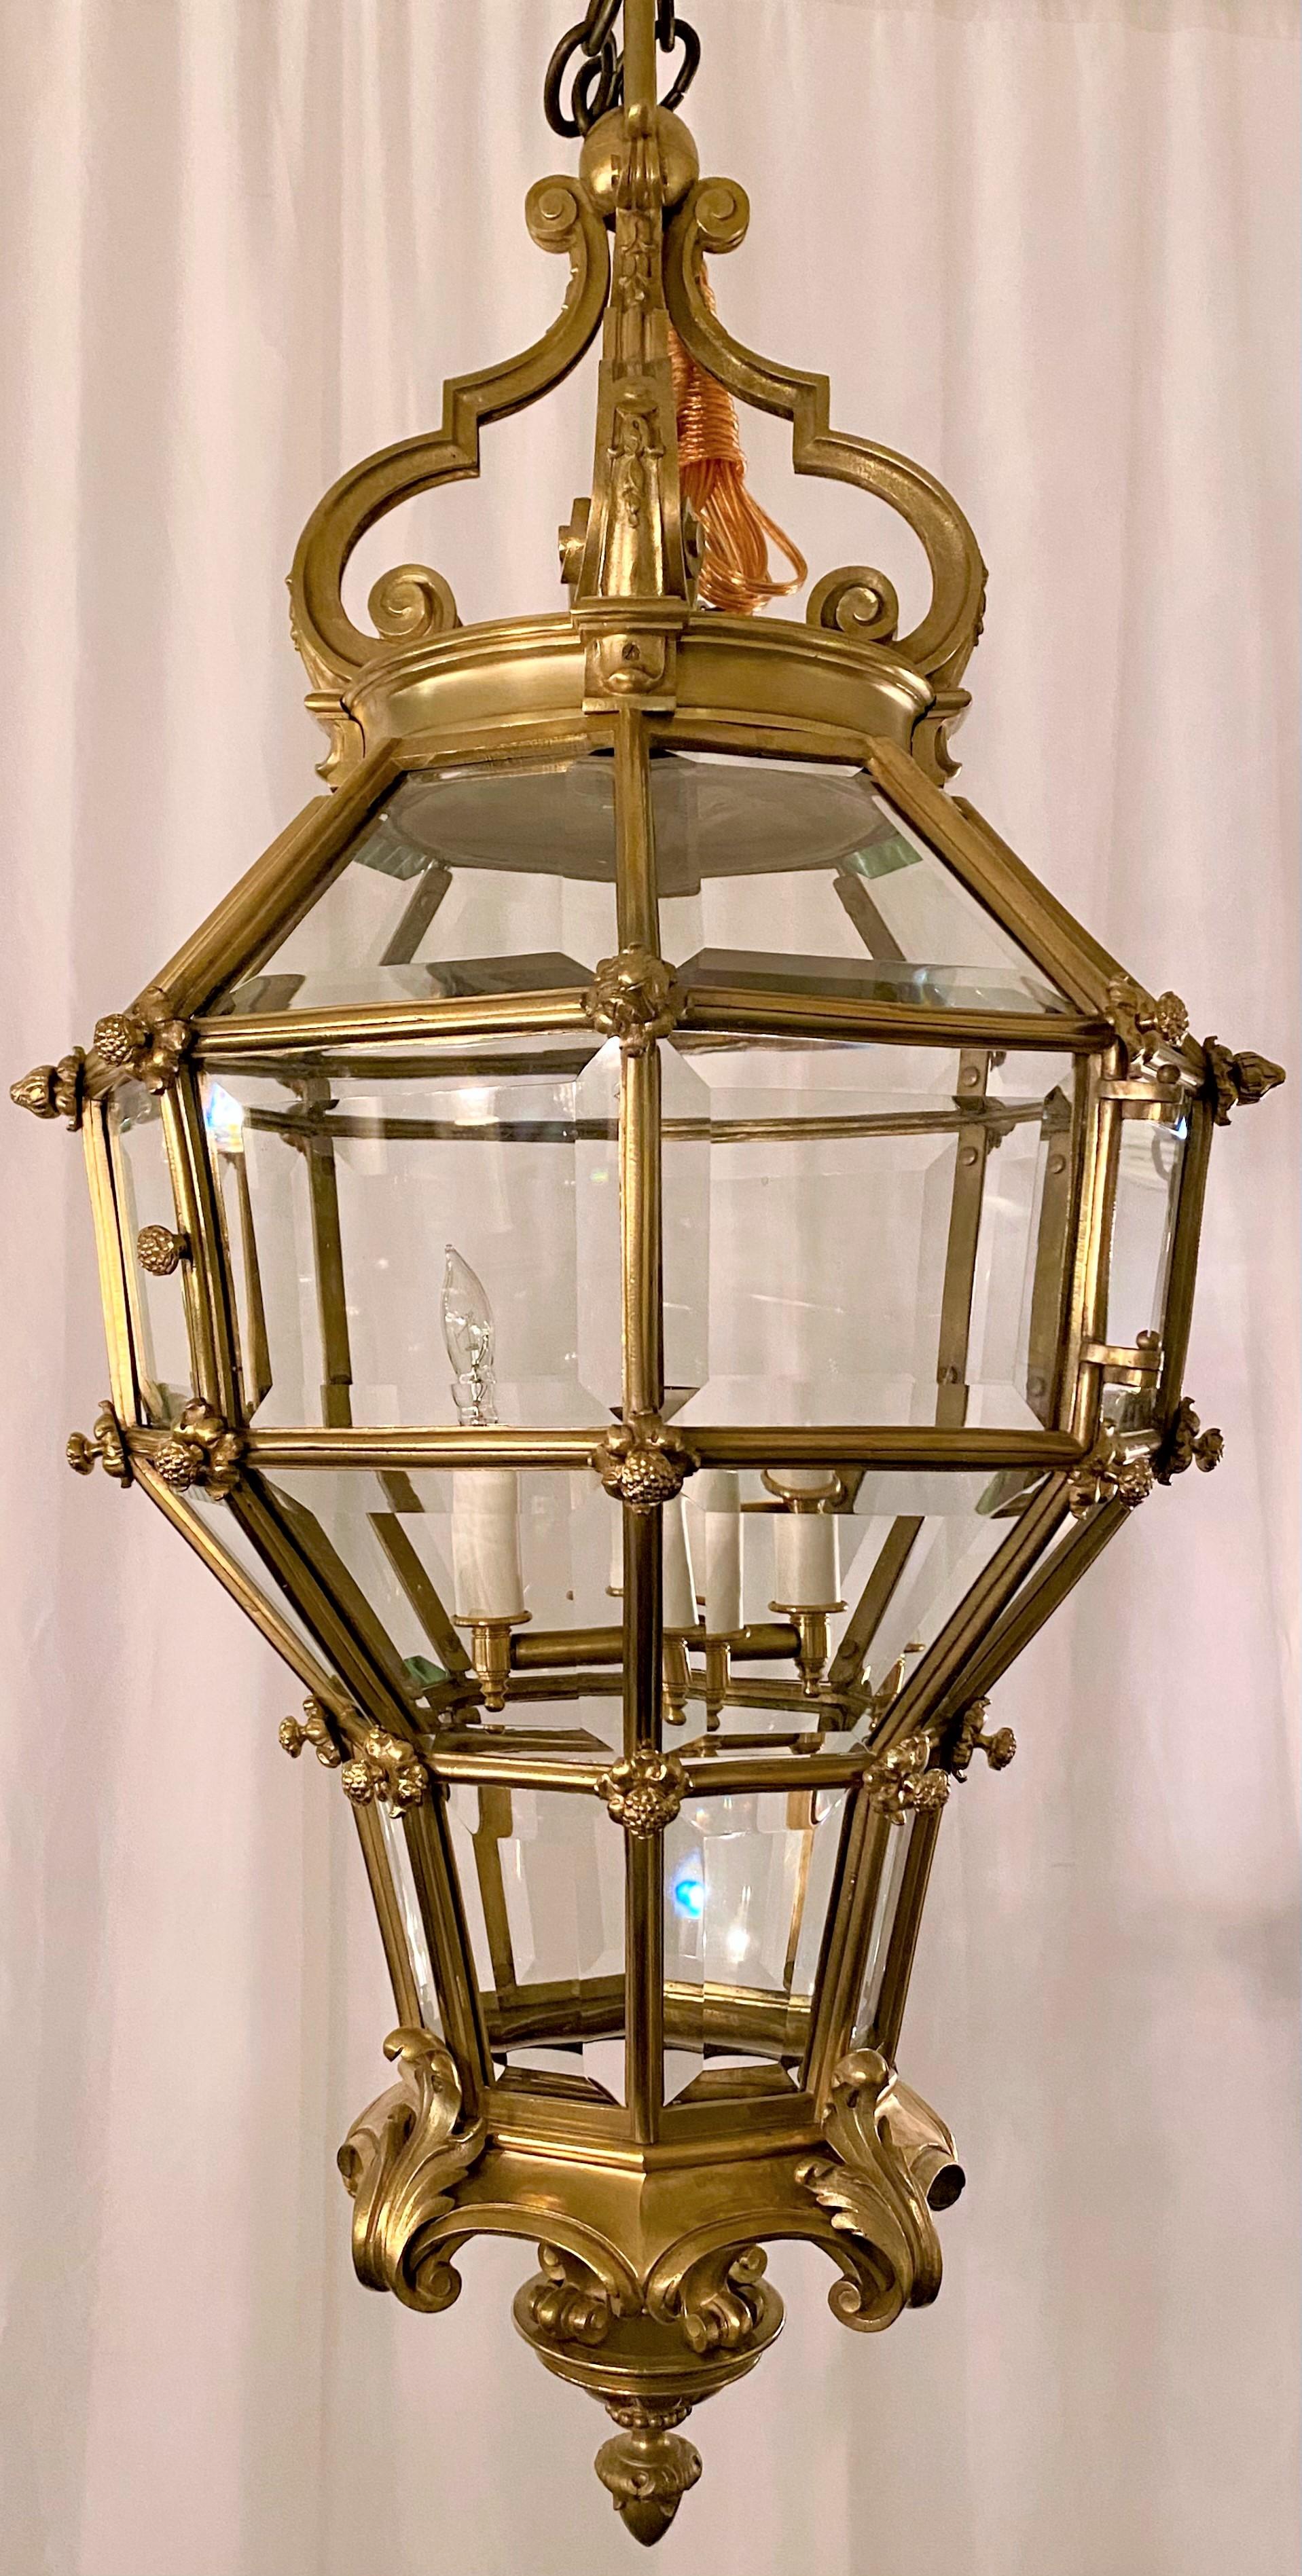 Antique 19th century French gold bronze and beveled glass chateau lantern.
CHB013.